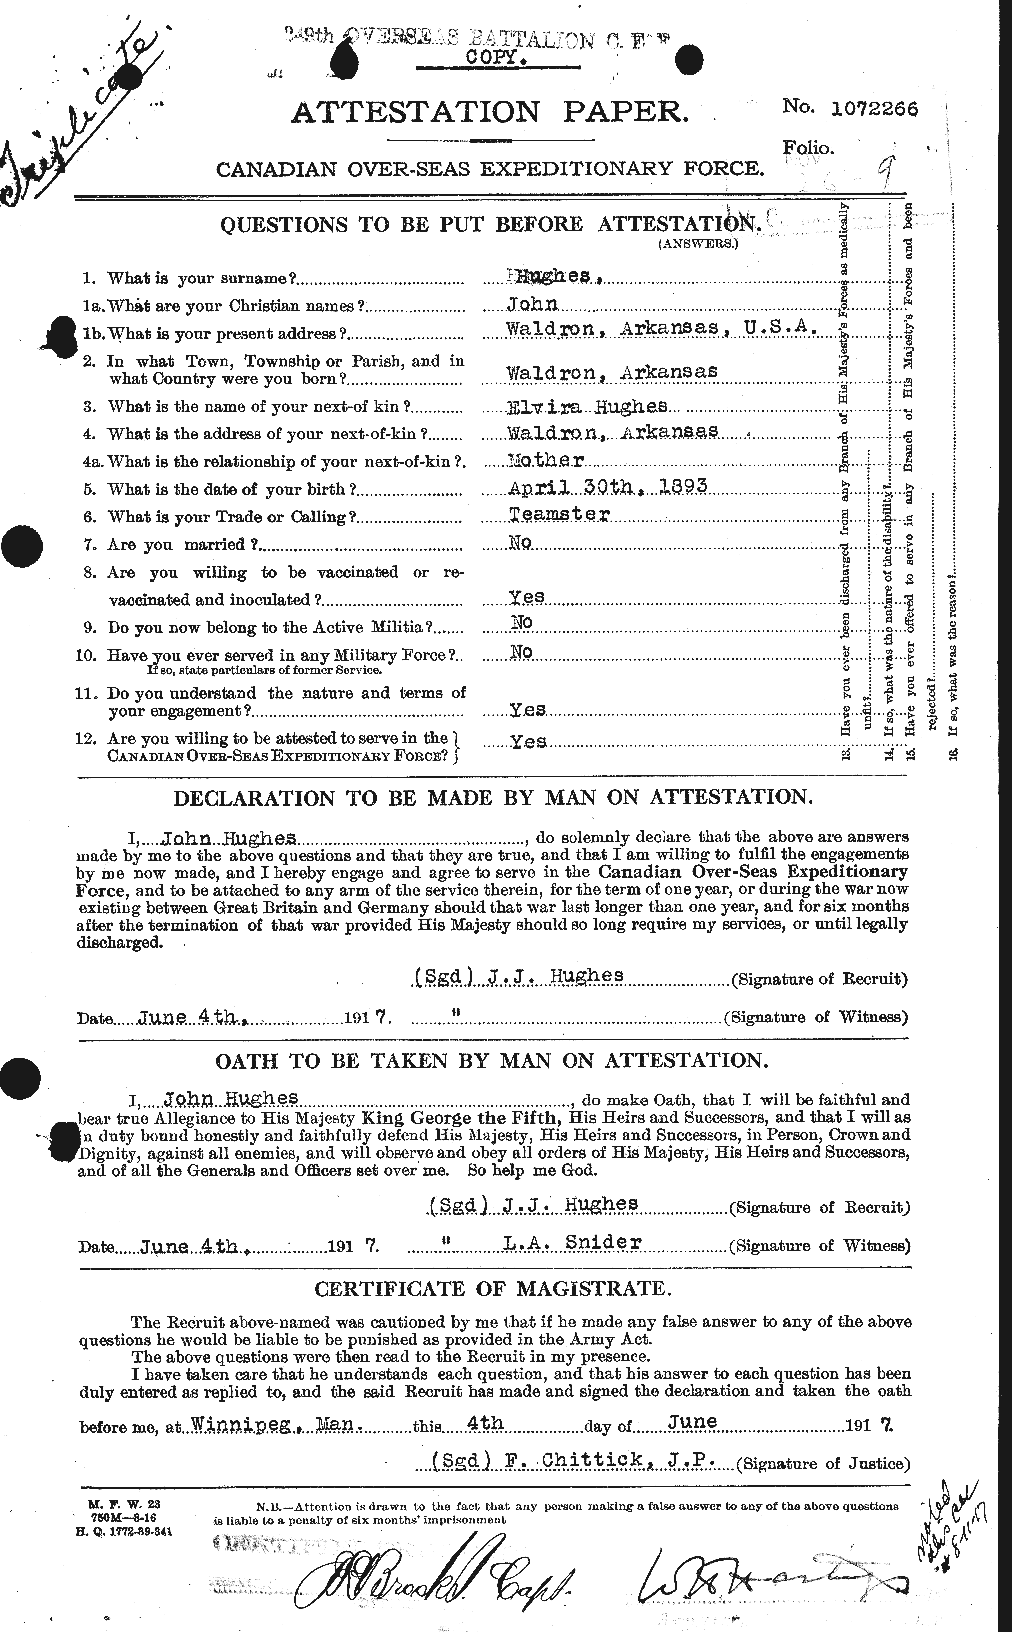 Personnel Records of the First World War - CEF 403980a